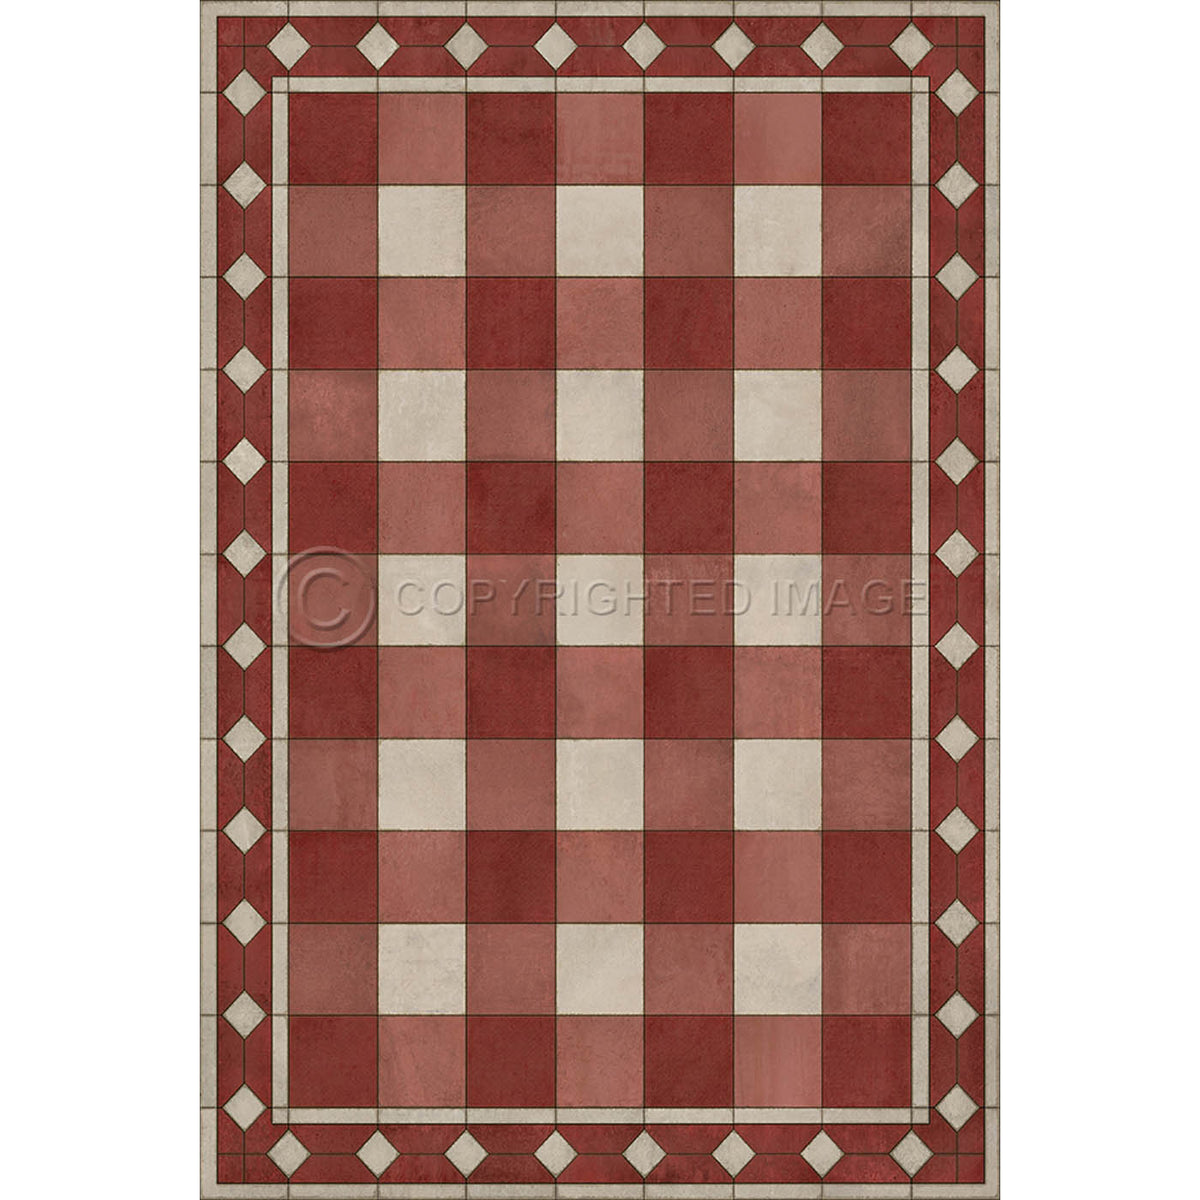 Gingham Tile Red 20x30